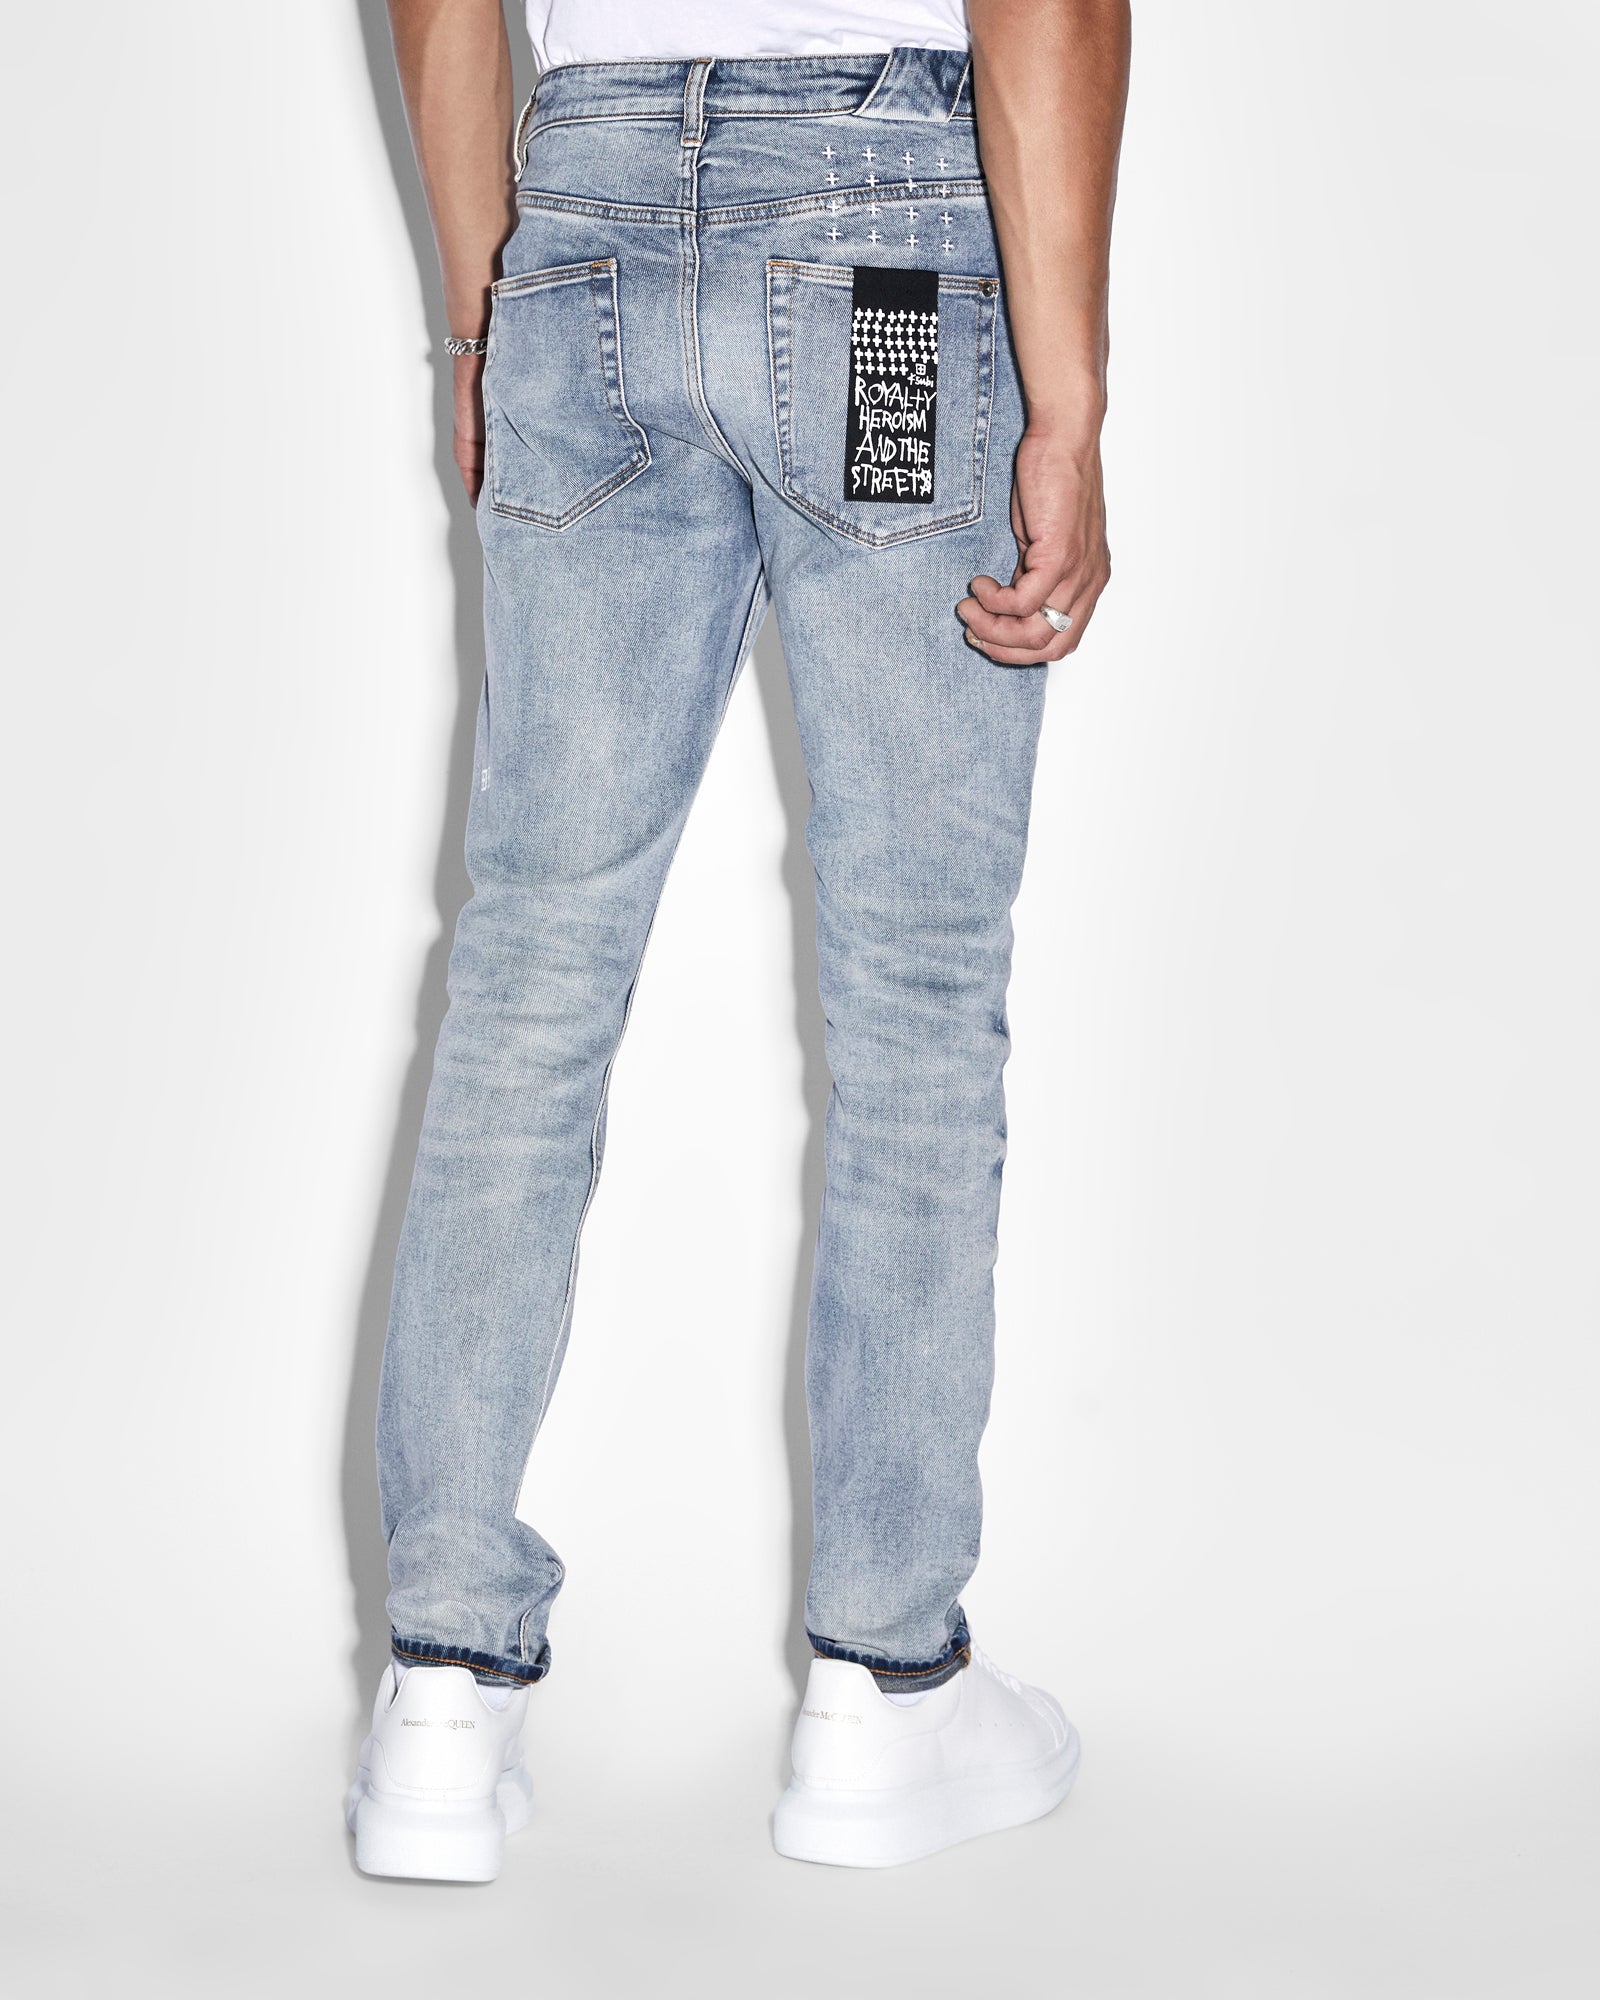 Buy Chitch Pure Dynamite | Men's Tapered Jeans | Ksubi